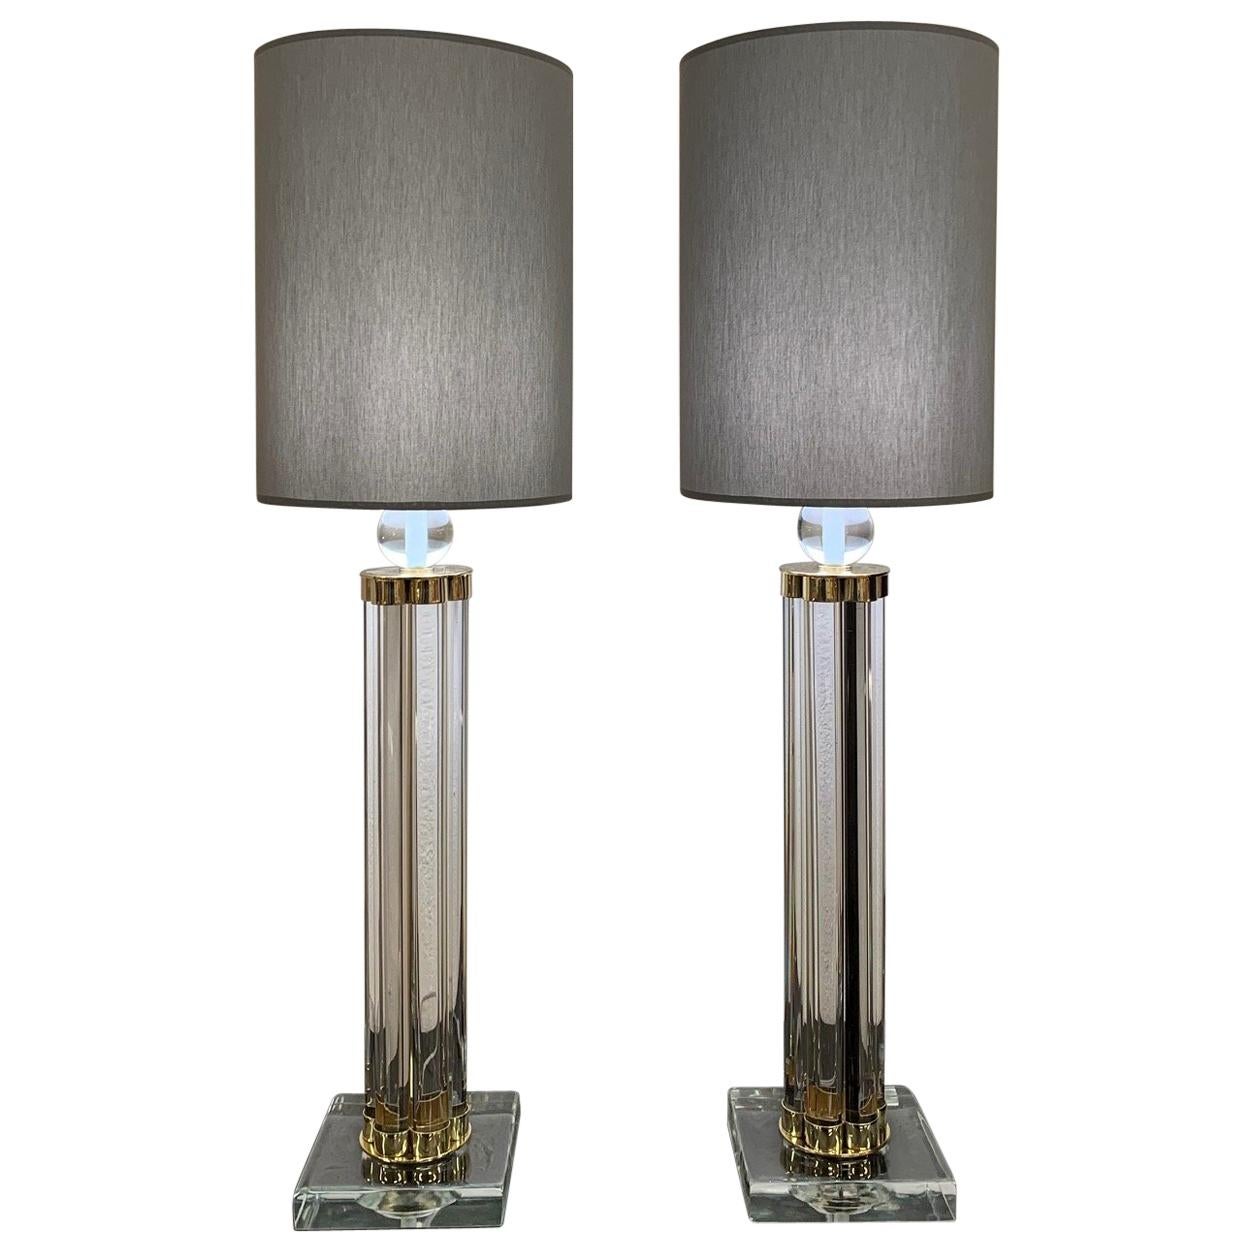 Pair of Murano Glass and Brass Table Lamps